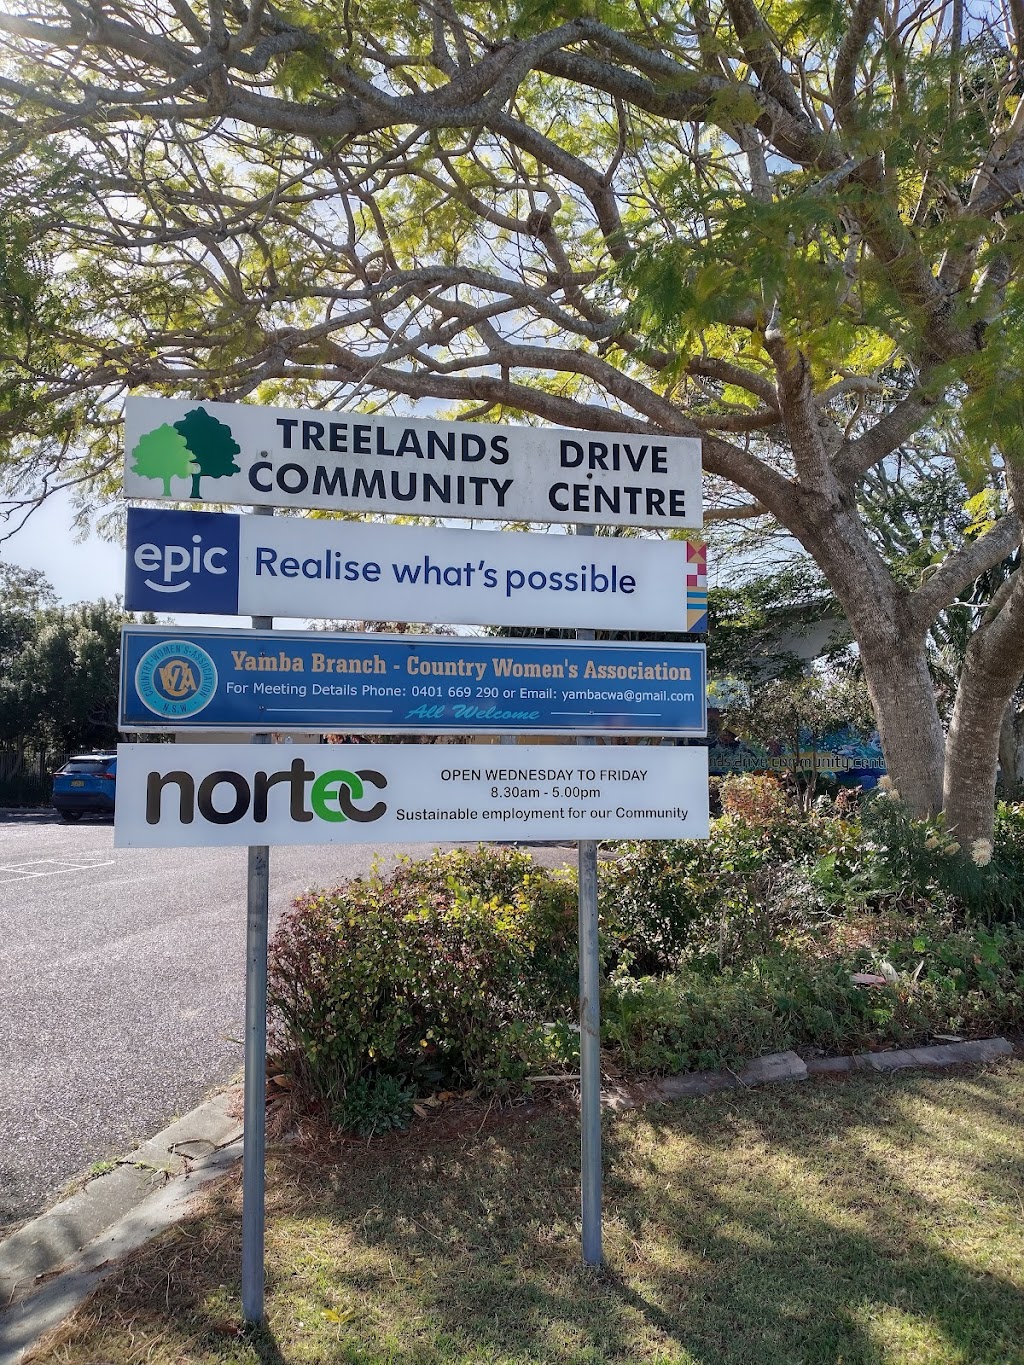 NORTEC - Yamba | local government office | Community Centre, 24 Treelands Dr, Yamba NSW 2464, Australia | 1800667832 OR +61 1800 667 832